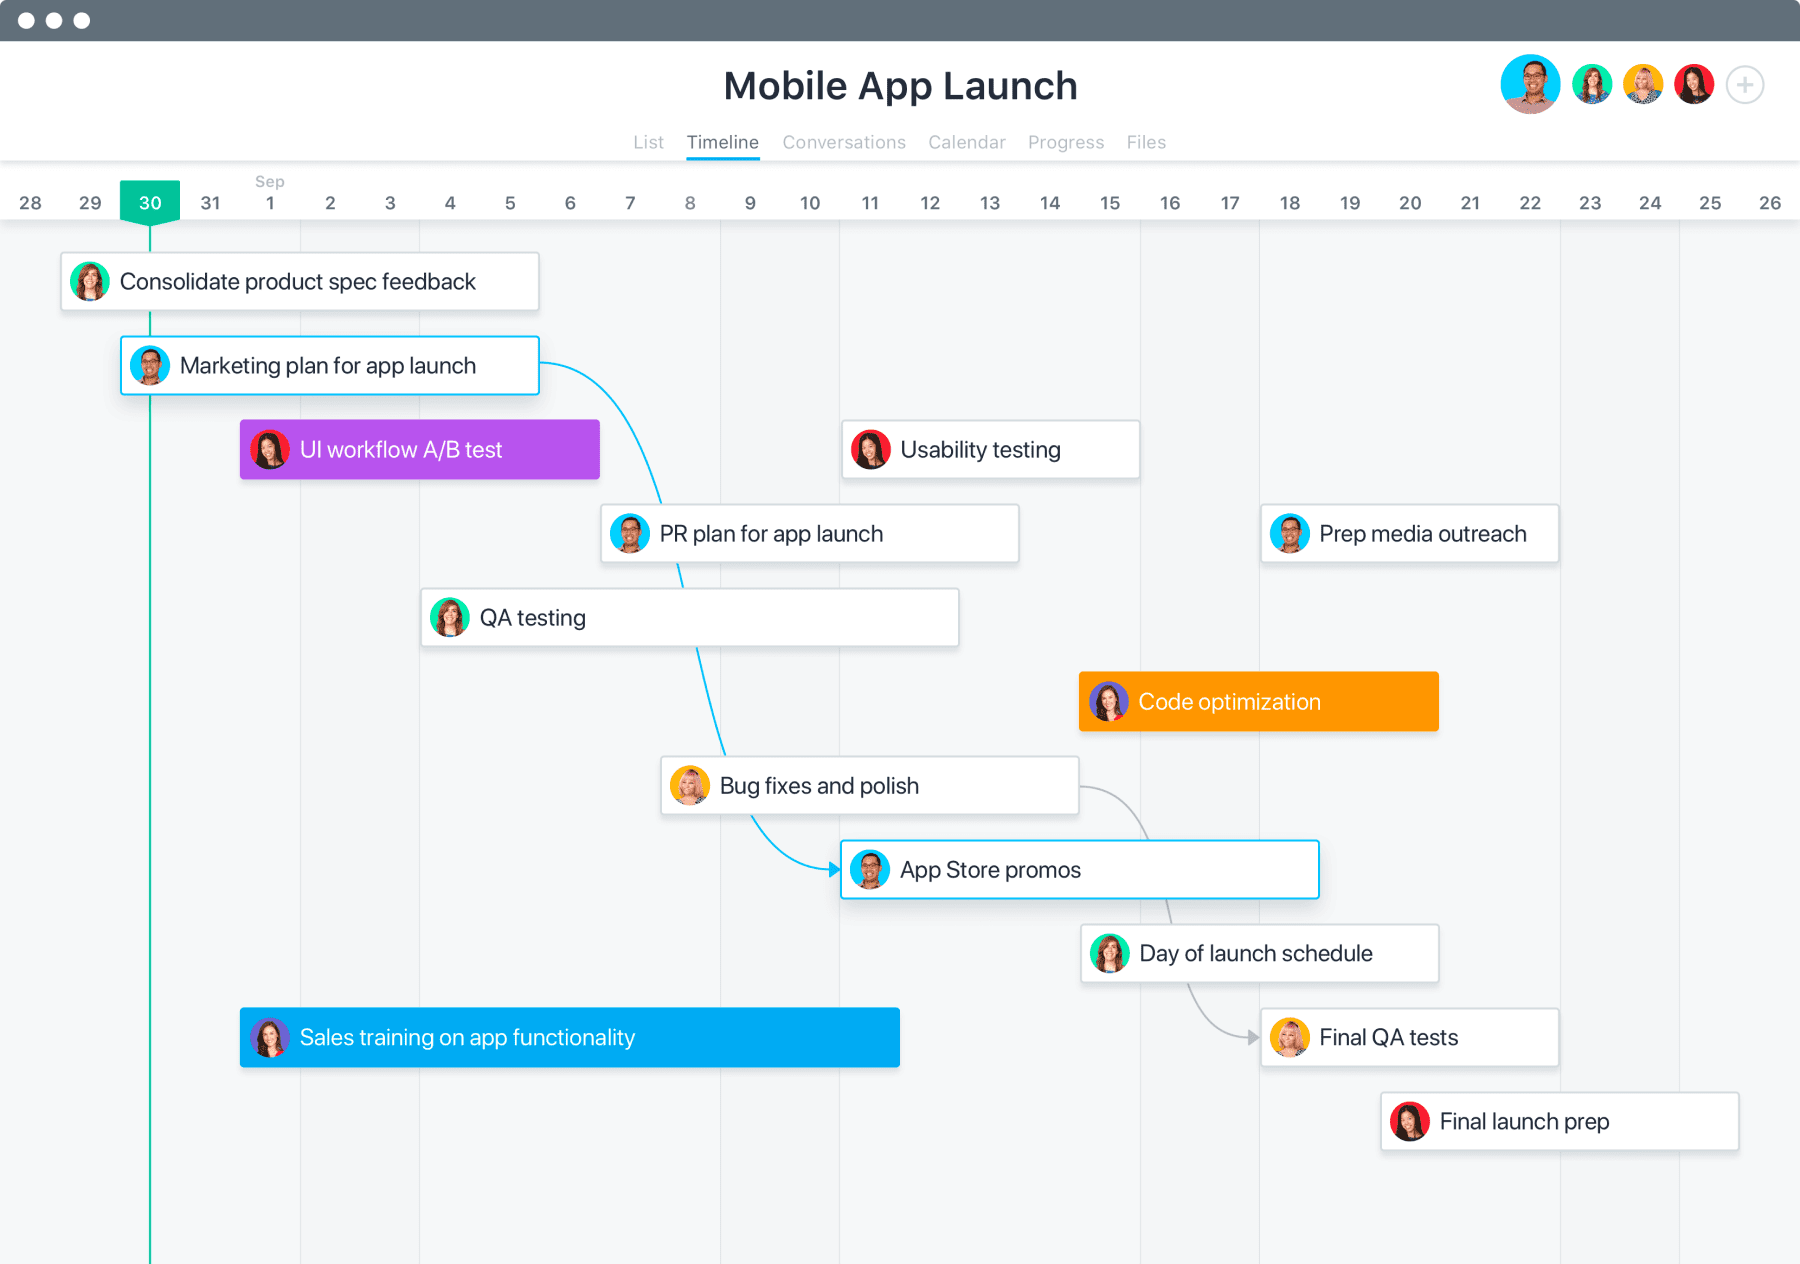 [Product UI] Mobile app launch project in Asana (Timeline)